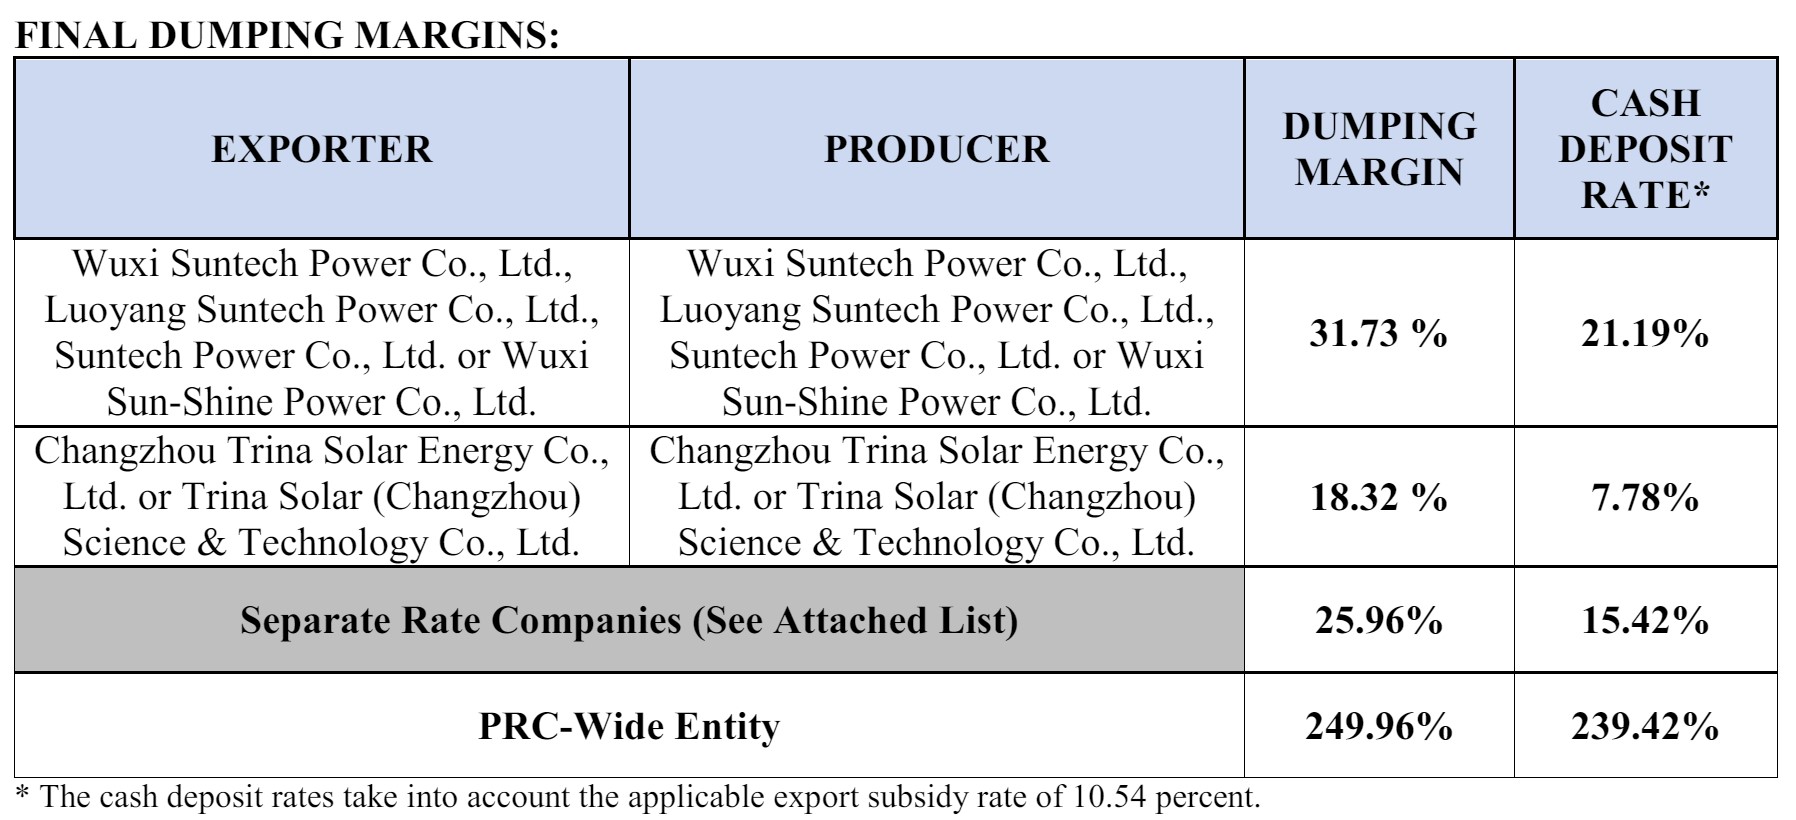  Final dumping margins table comparing top Chinese Solar Energy exporters and producers 